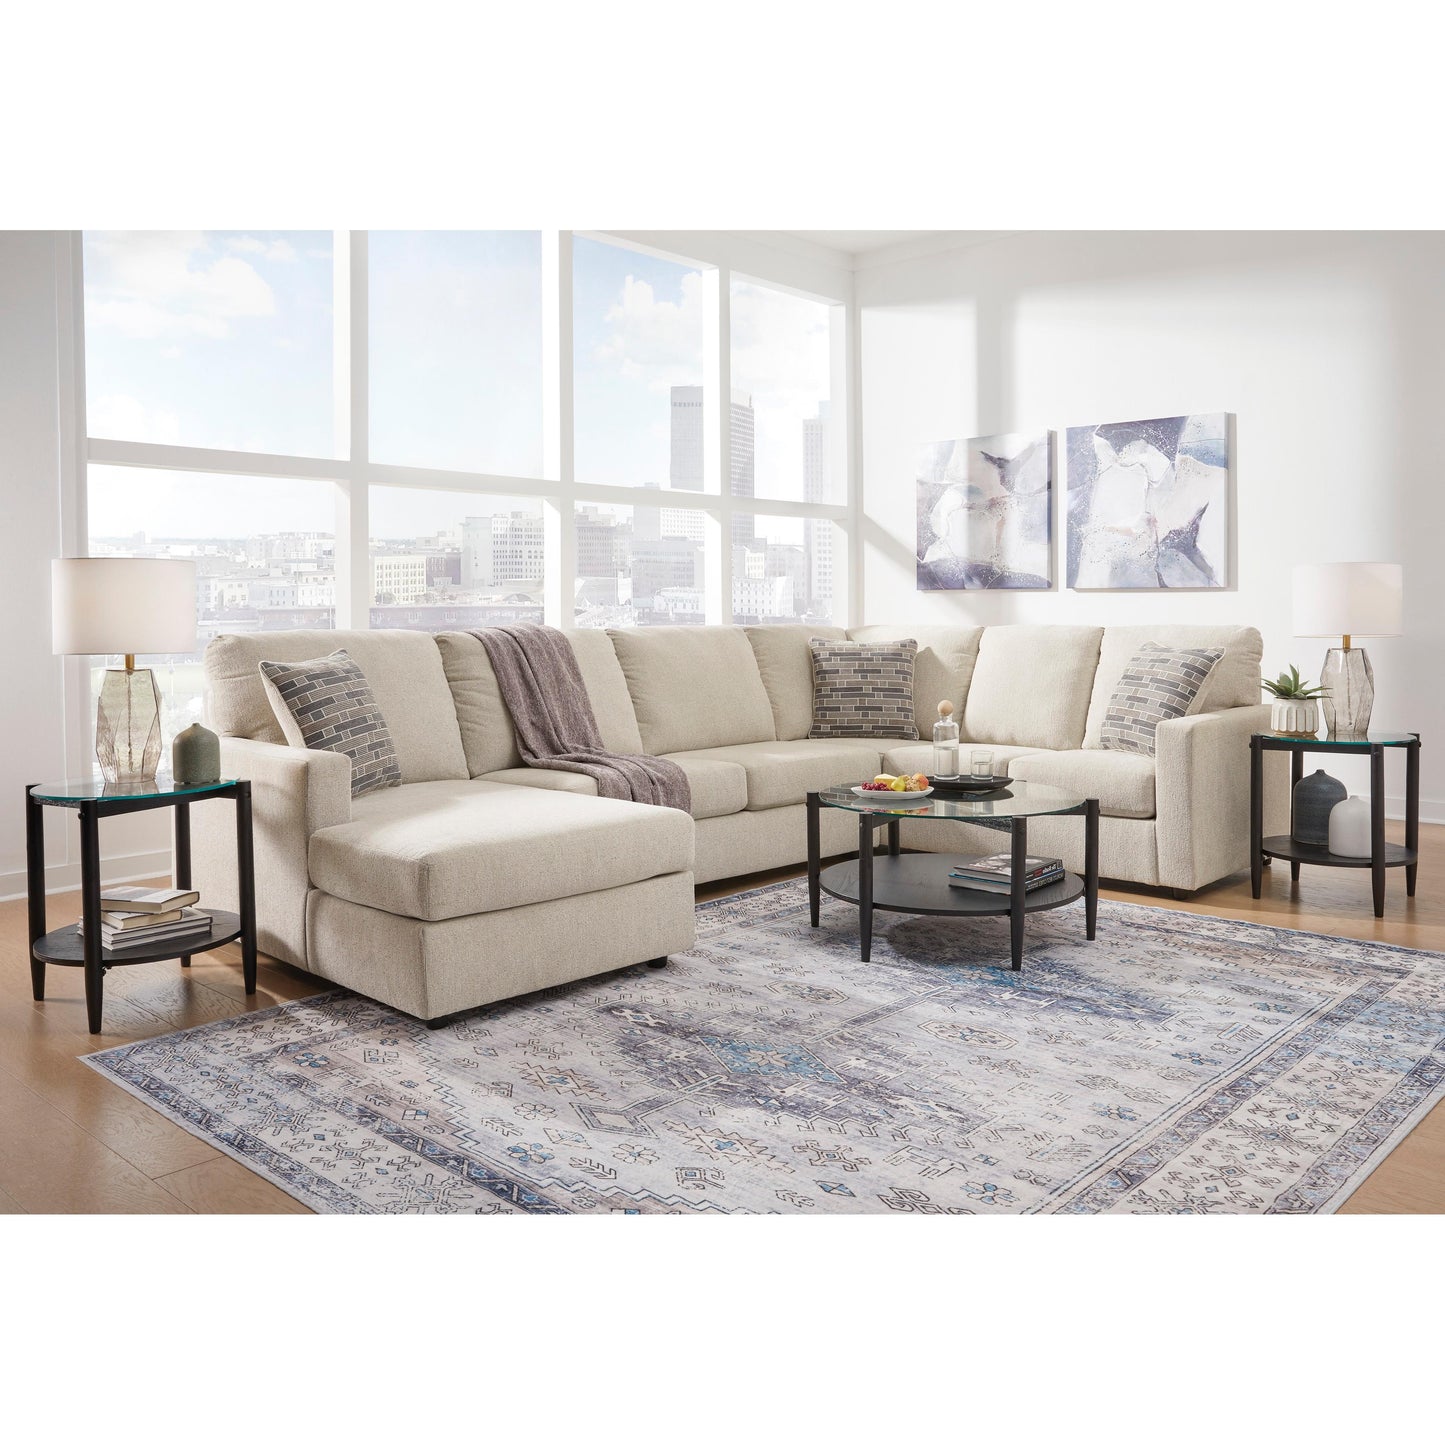 Signature Design by Ashley Edenfield Fabric 3 pc Sectional 2900416/2900434/2900449 IMAGE 4